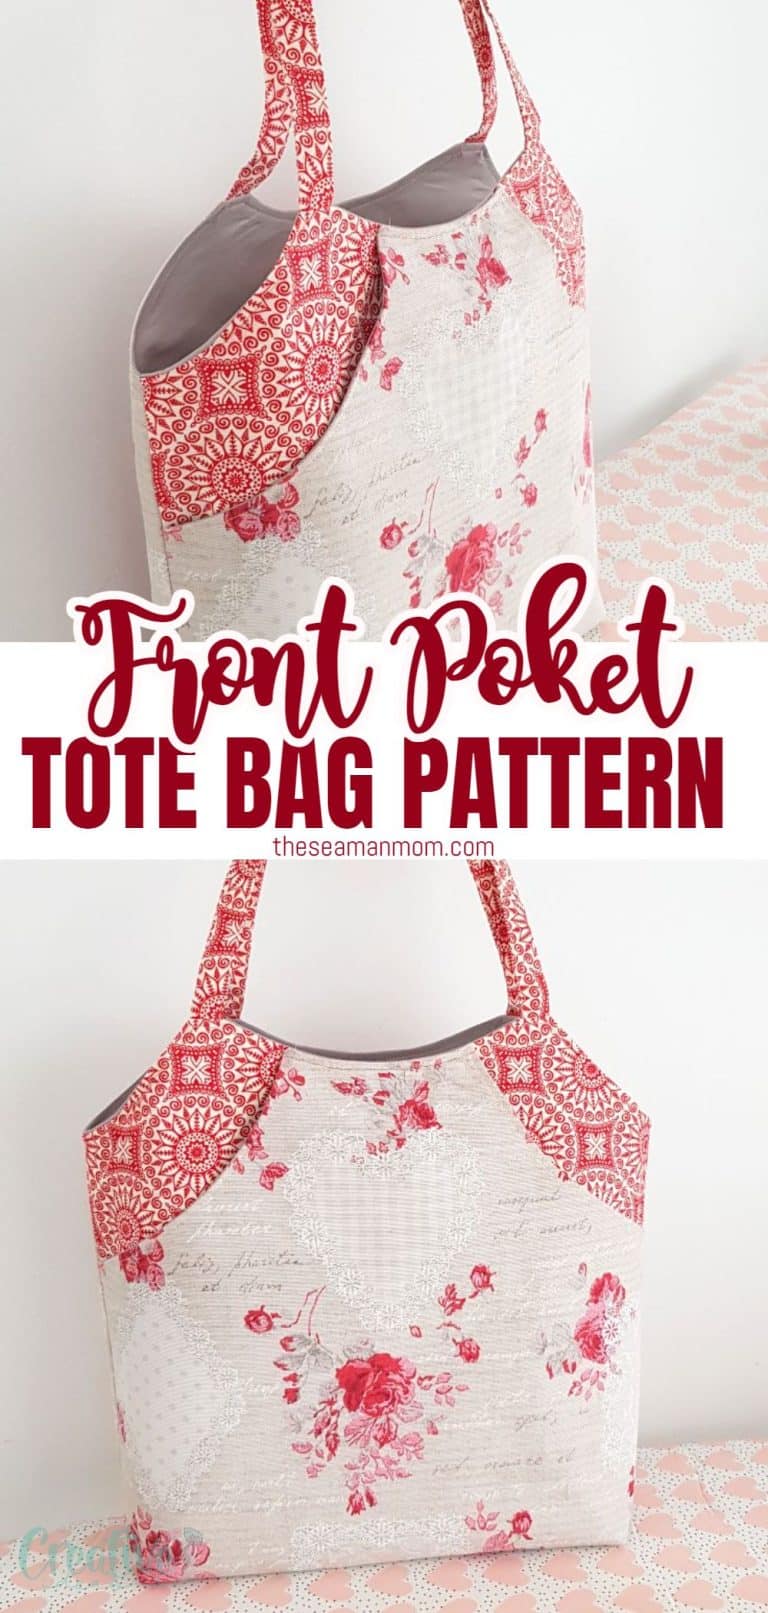 Deep Front Pocket Tote Bag Pattern - Easy Peasy Creative Ideas